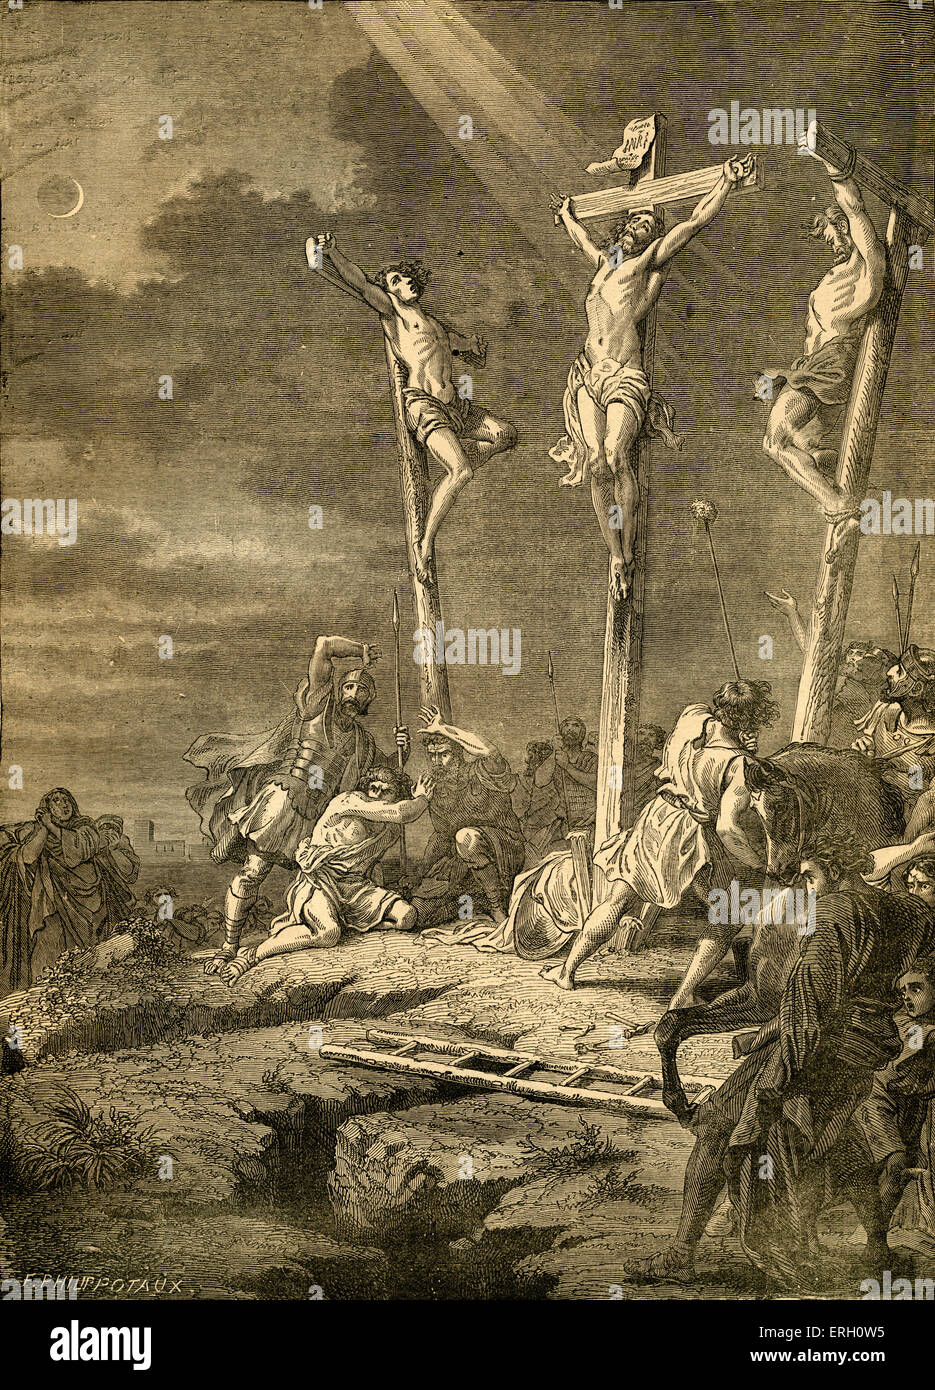 The Crucifixion of Jesus Christ, Matthew XXVII.  From Cassell's Illustrated Family Bible. Engraving by F. Philippotaux. Stock Photo